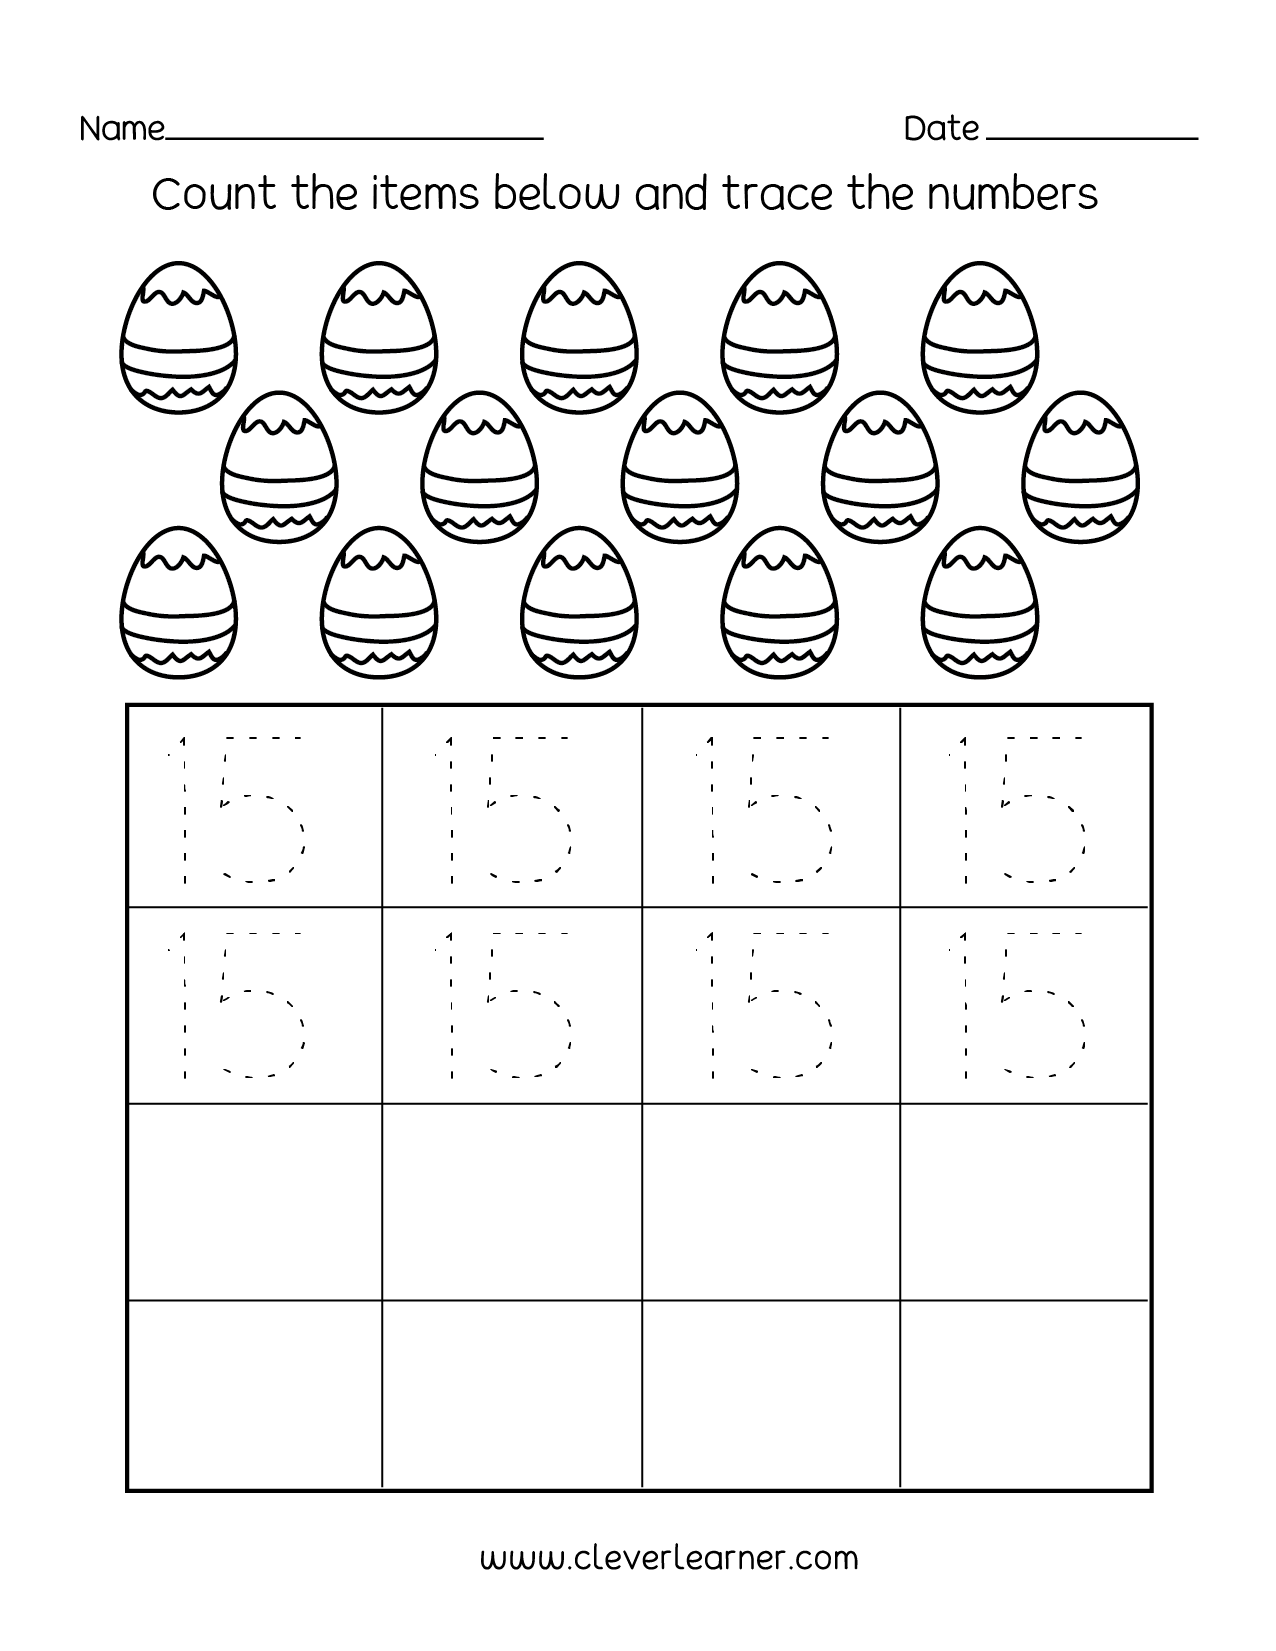 counting-15-worksheets